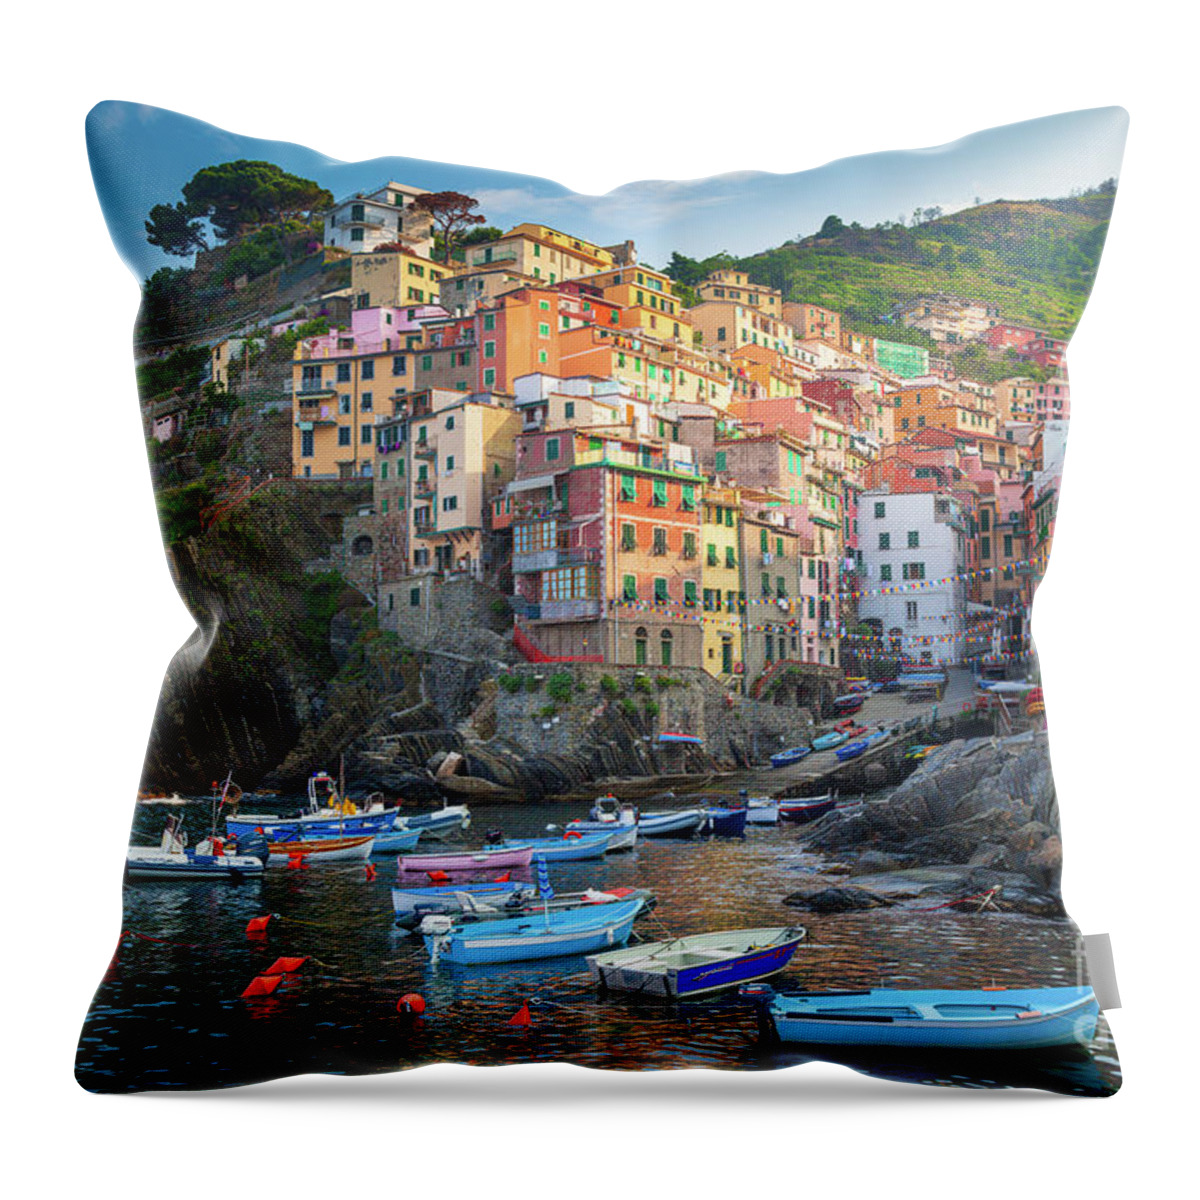 Cinque Terre Throw Pillow featuring the photograph Riomaggiore Boats by Inge Johnsson